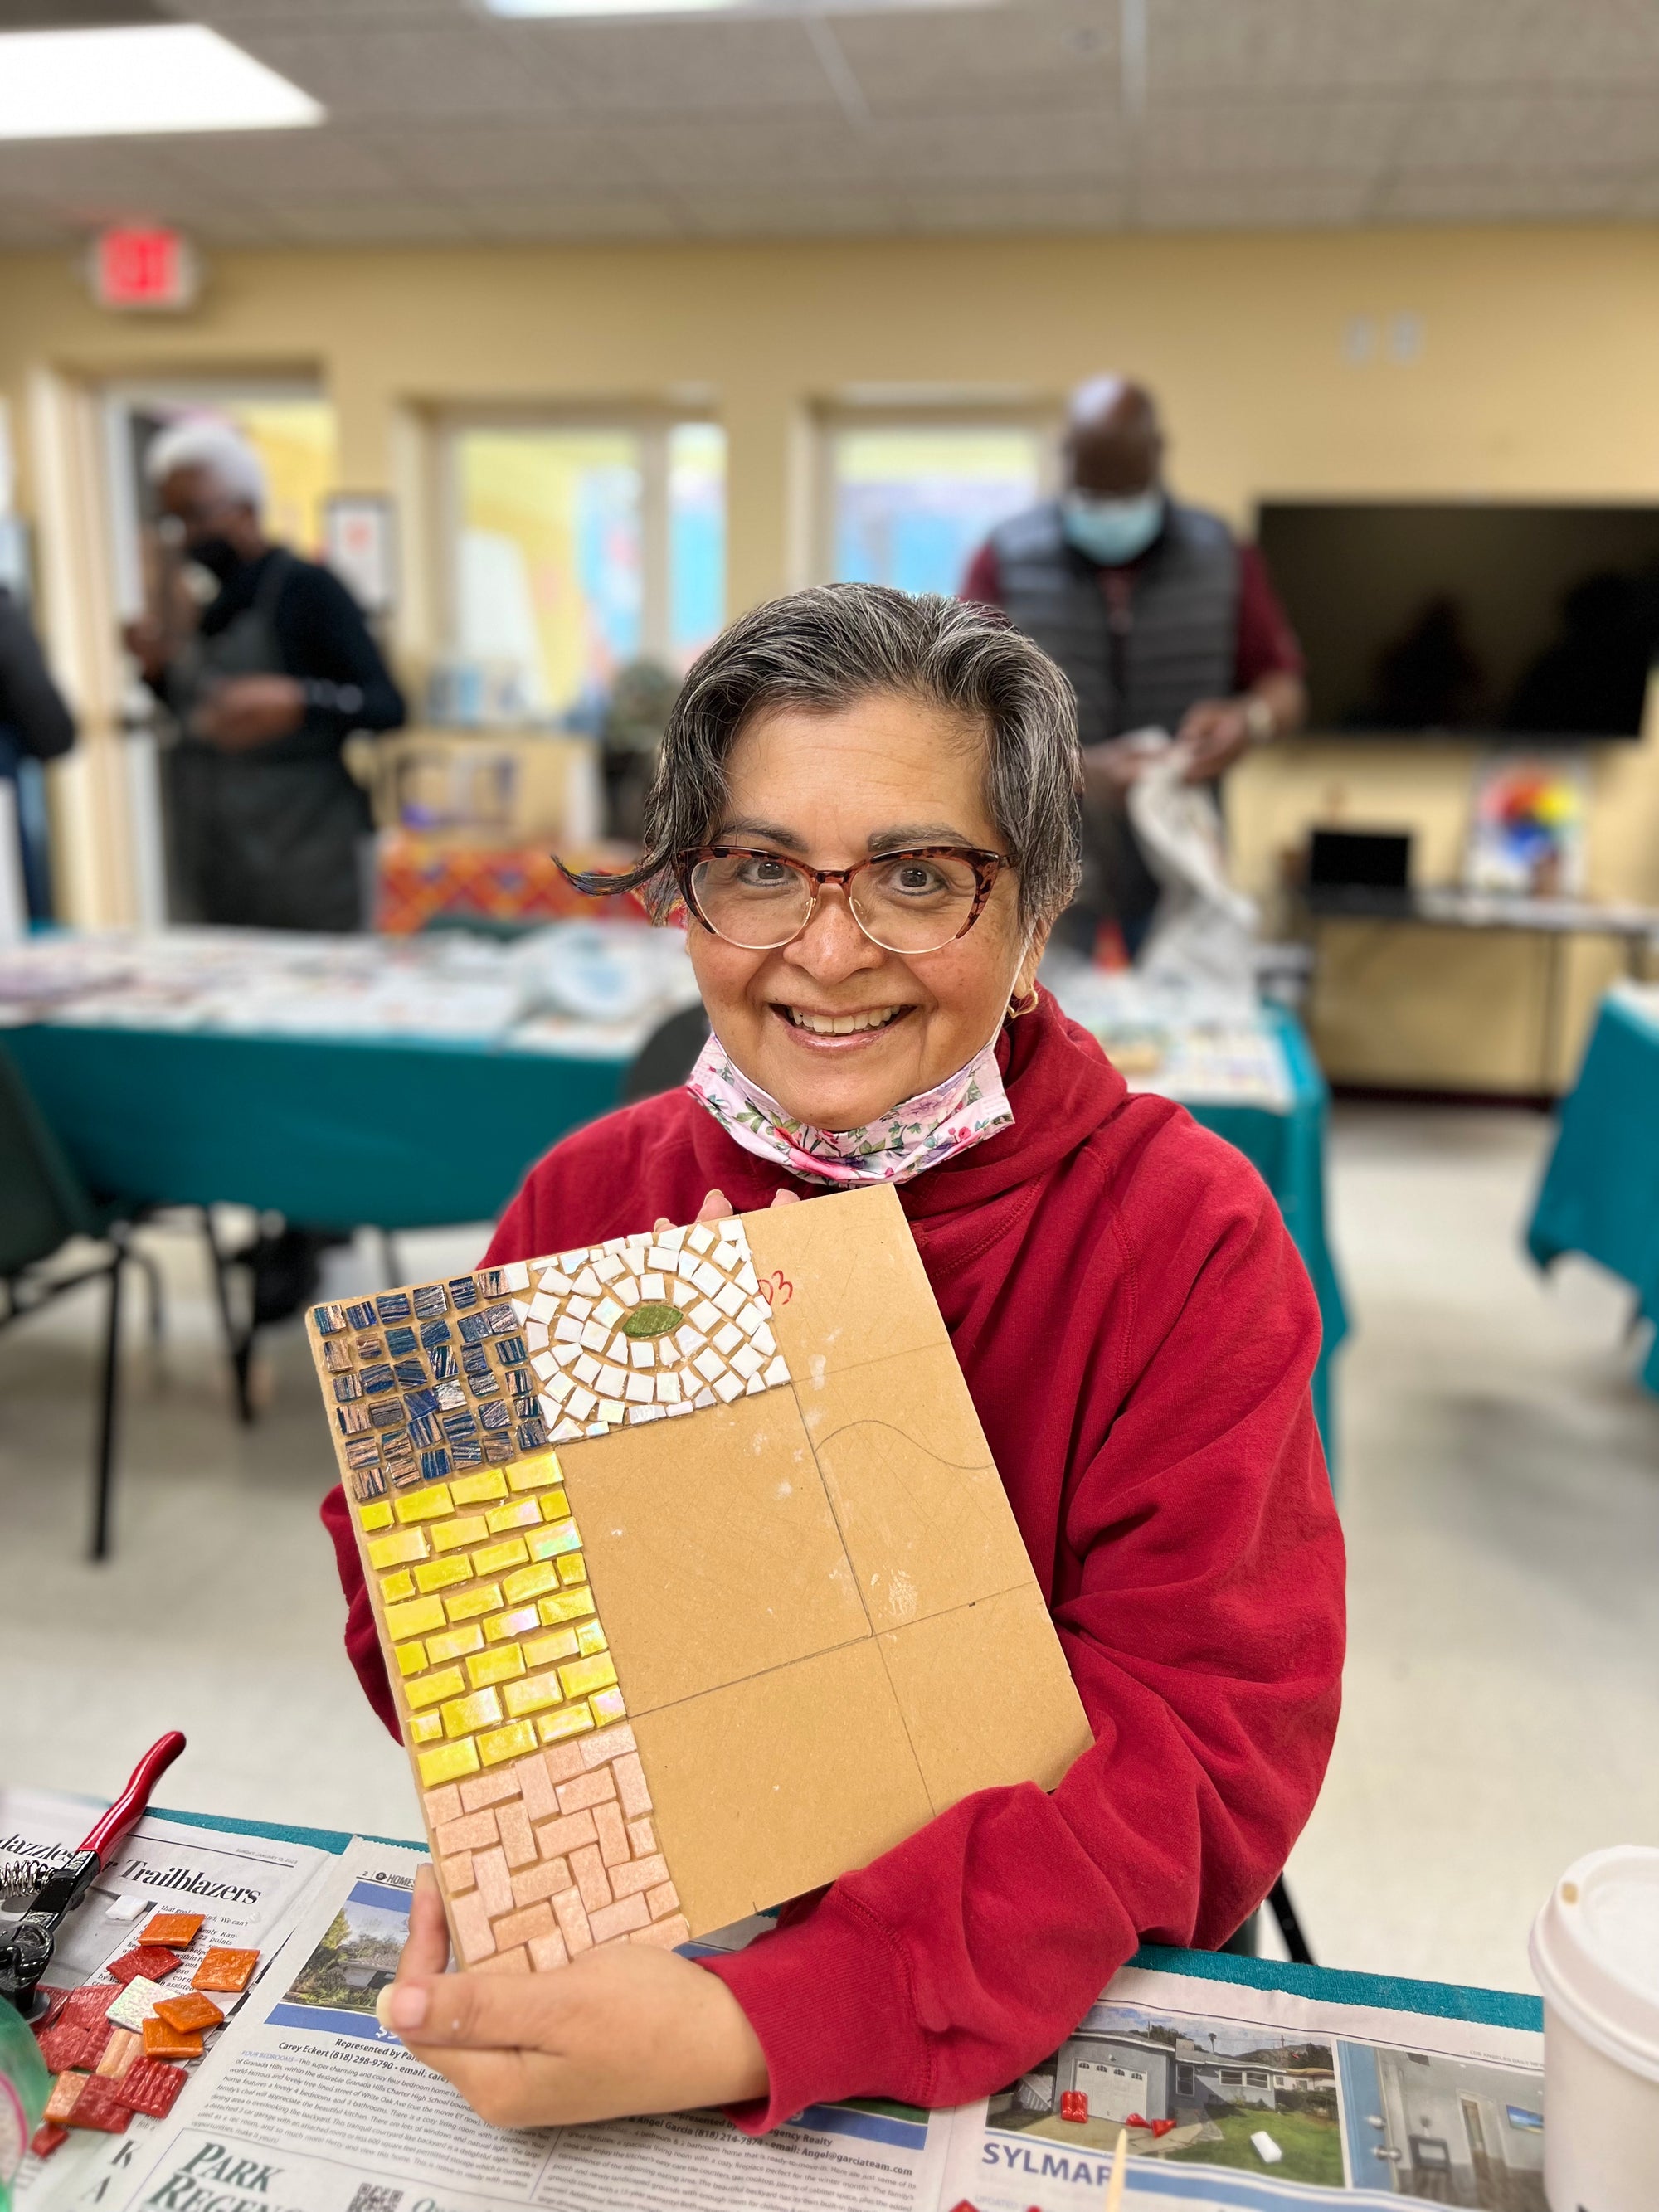 Artist smiling and holding up a half-finished mosaic of squares.